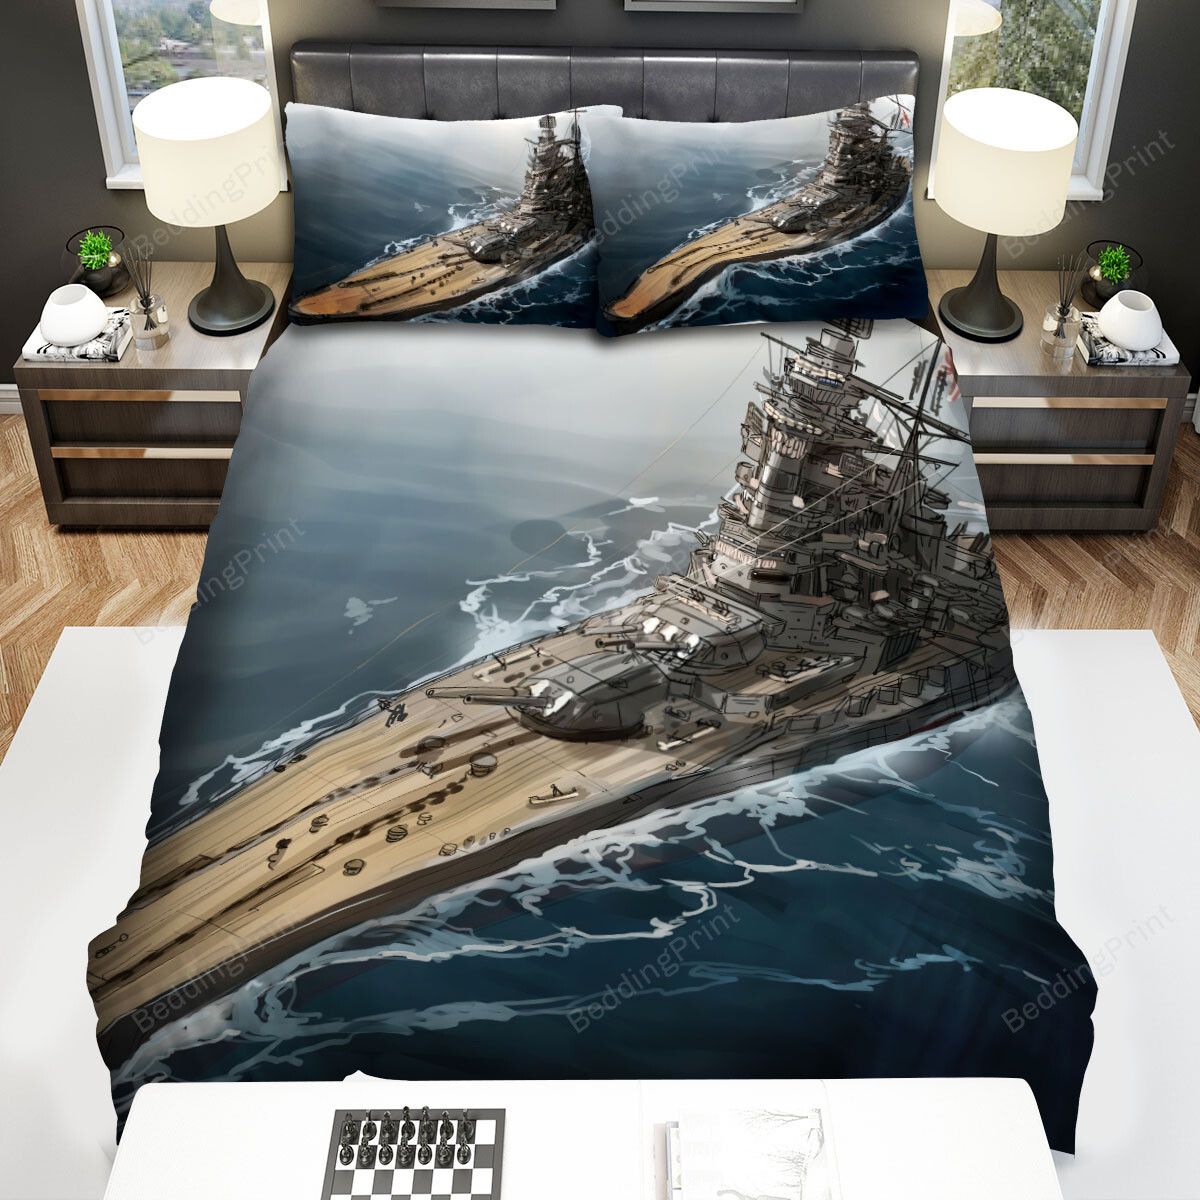 Military Weapon In Ww2 Of Ijn, Nagato Ship In Anime Bed Sheets Spread Duvet Cover Bedding Sets